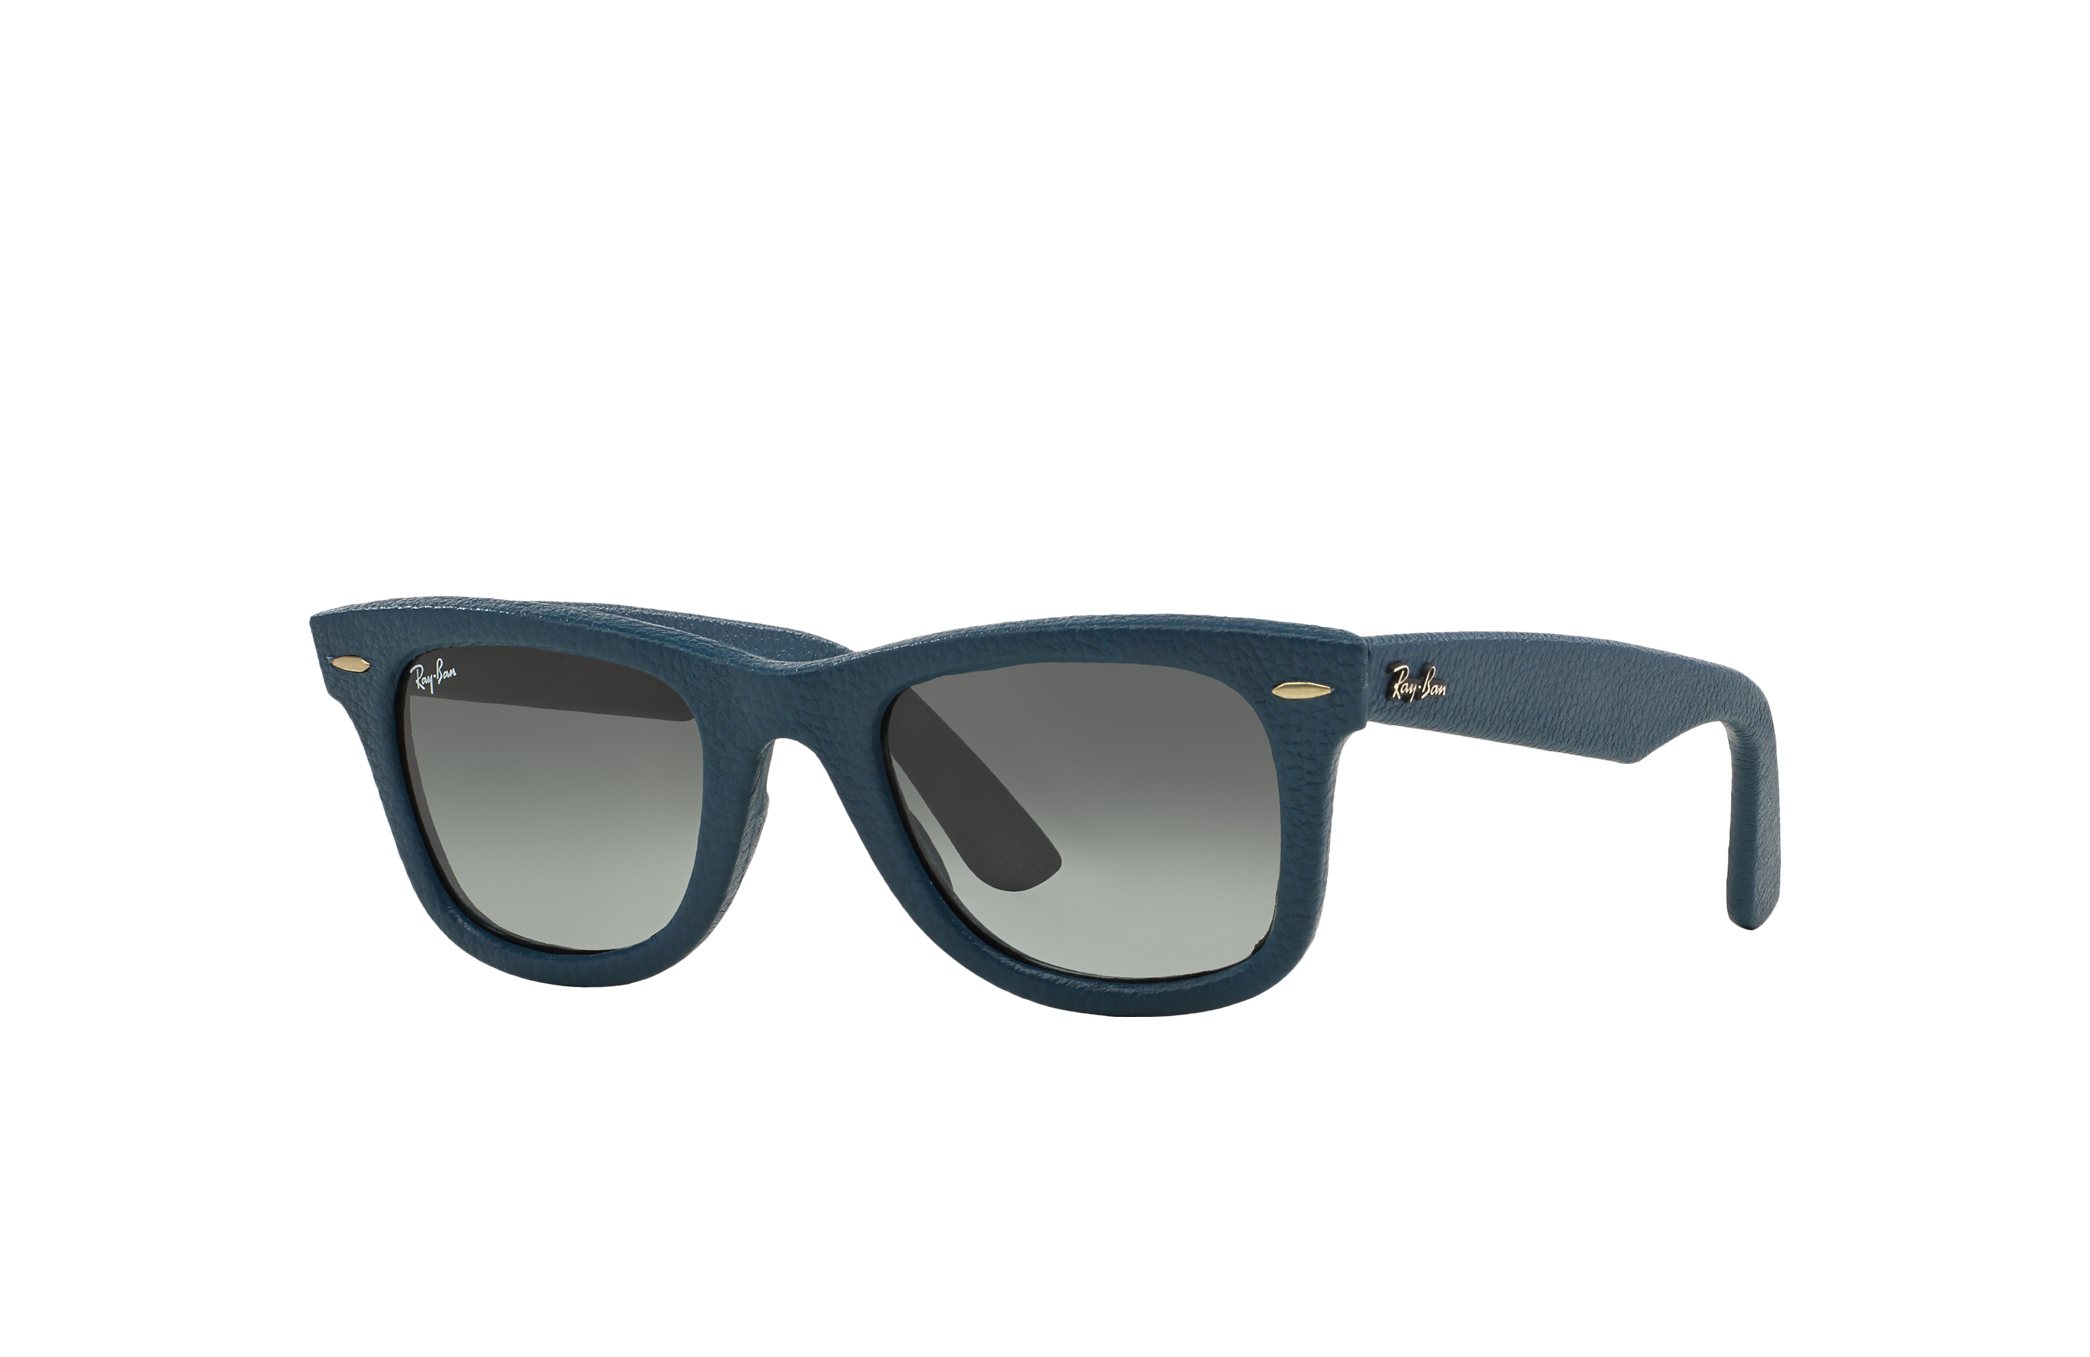 Arriba 90+ imagen ray ban sunglasses with leather frame - Thptnganamst ...